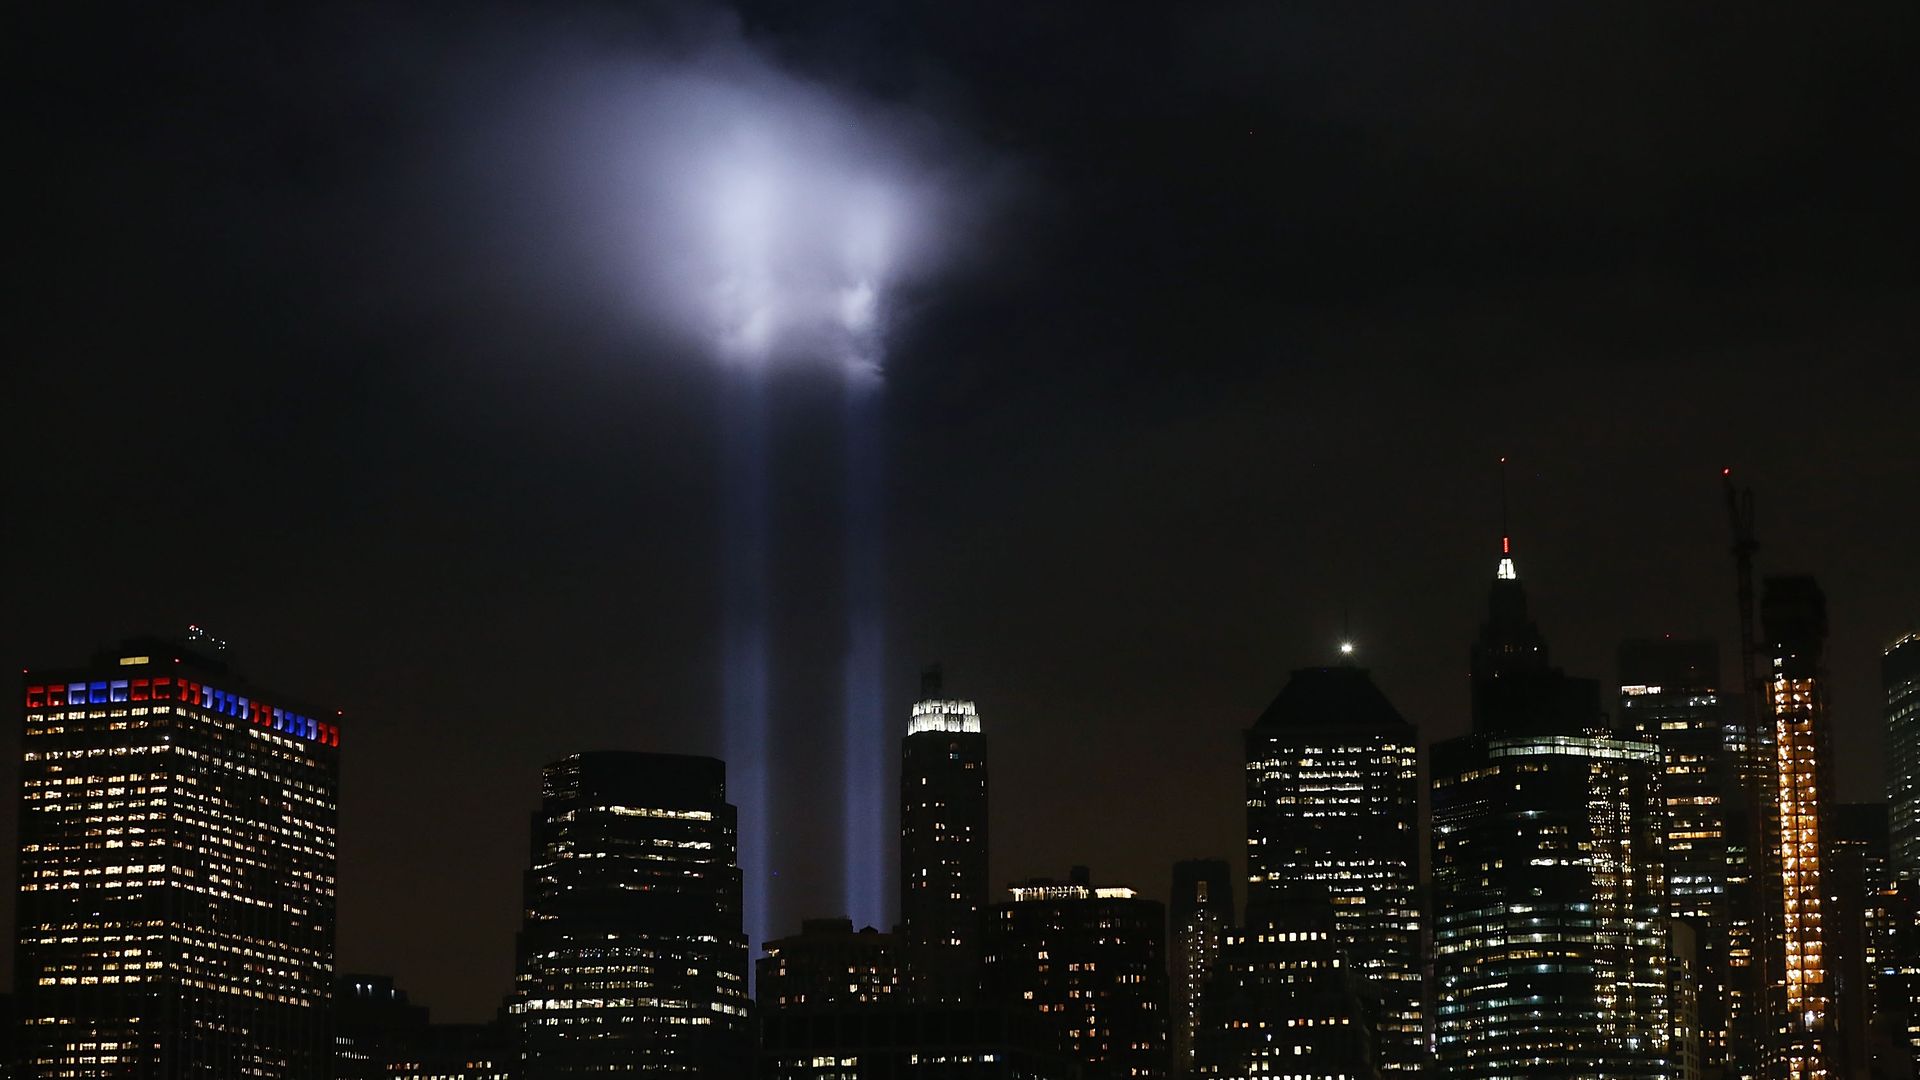 Twin towers' absence highlighted with spotlights in the night sky.